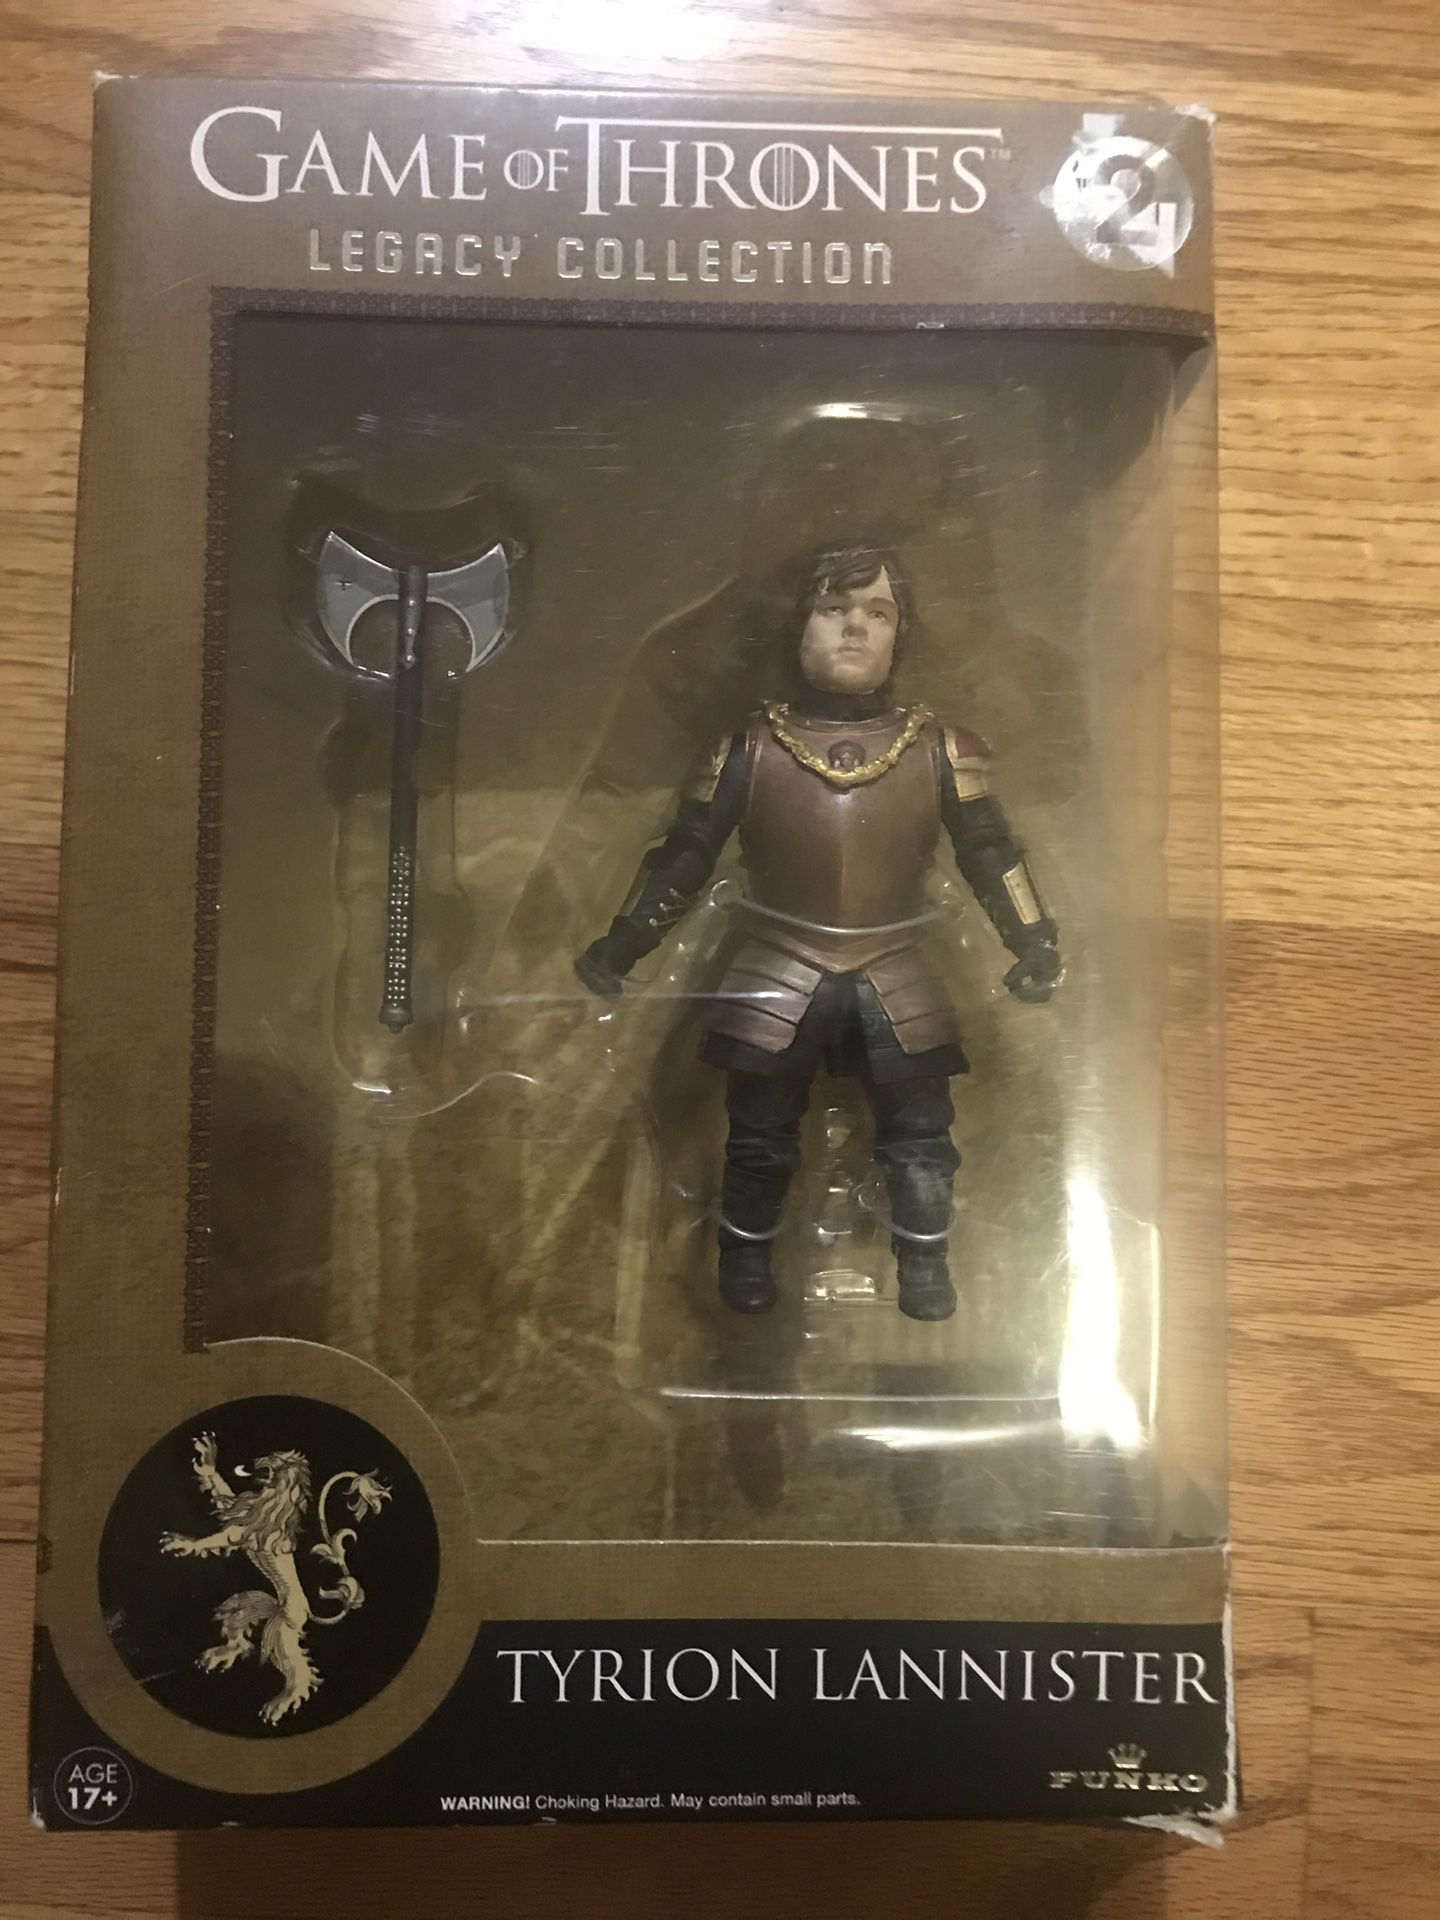 New- Game of Thrones- Tyrion Lannister figure- fun I